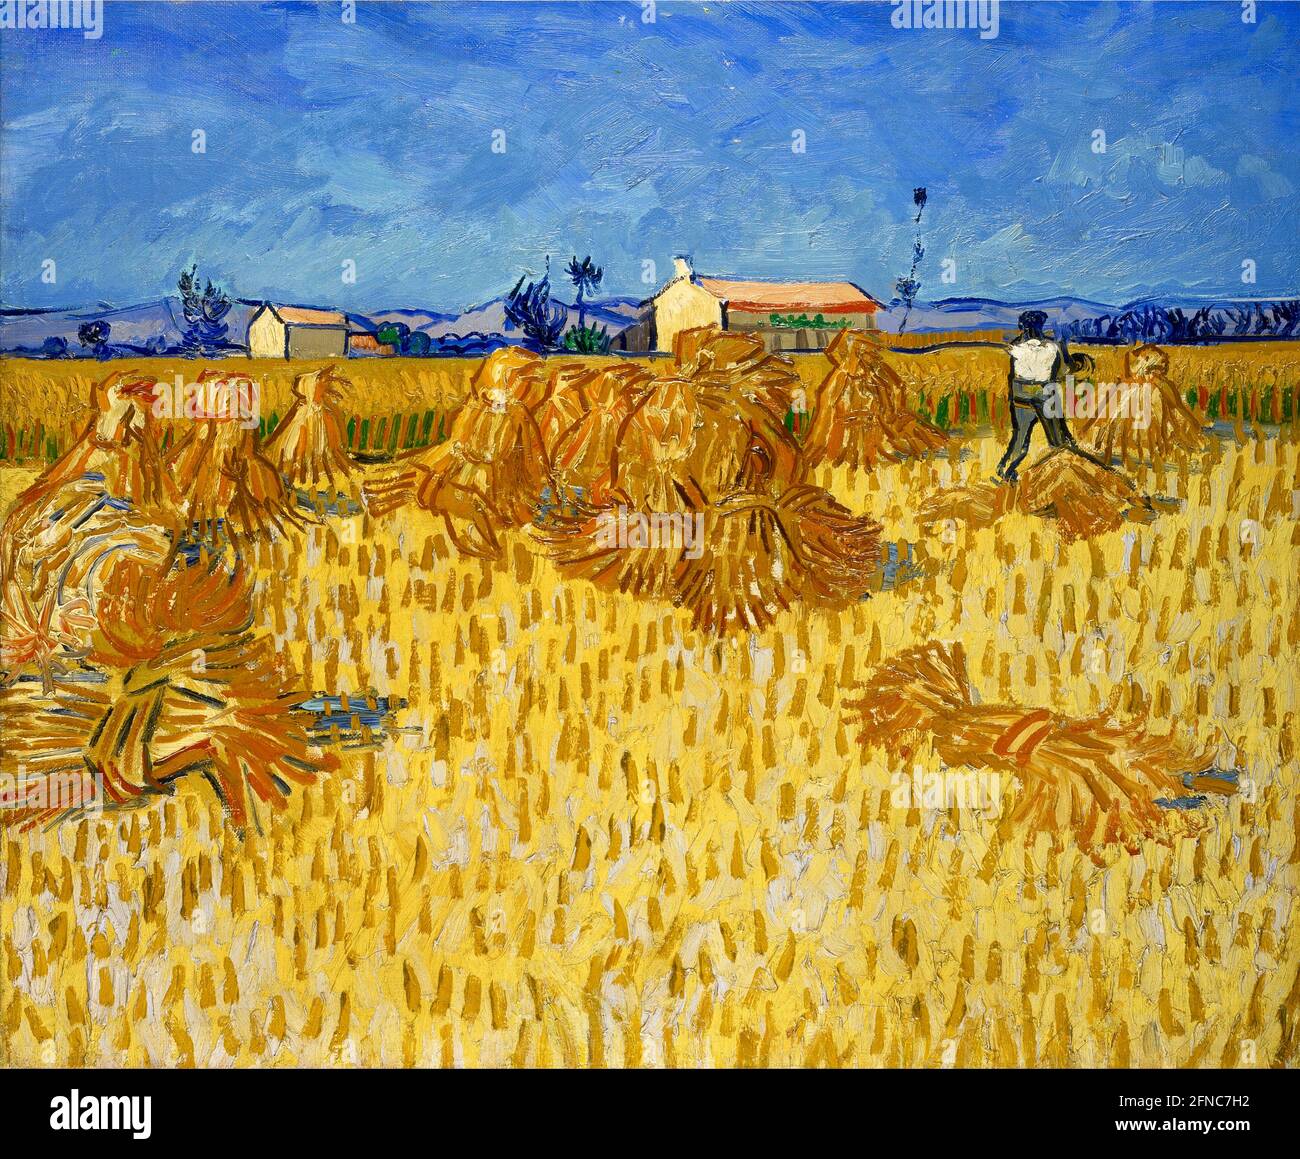 Vincent van Gogh artwork entitled Harvest in Provence. Rural scene from the south of France with a vivid golden corn harvest against a  rich blue sky. Stock Photo